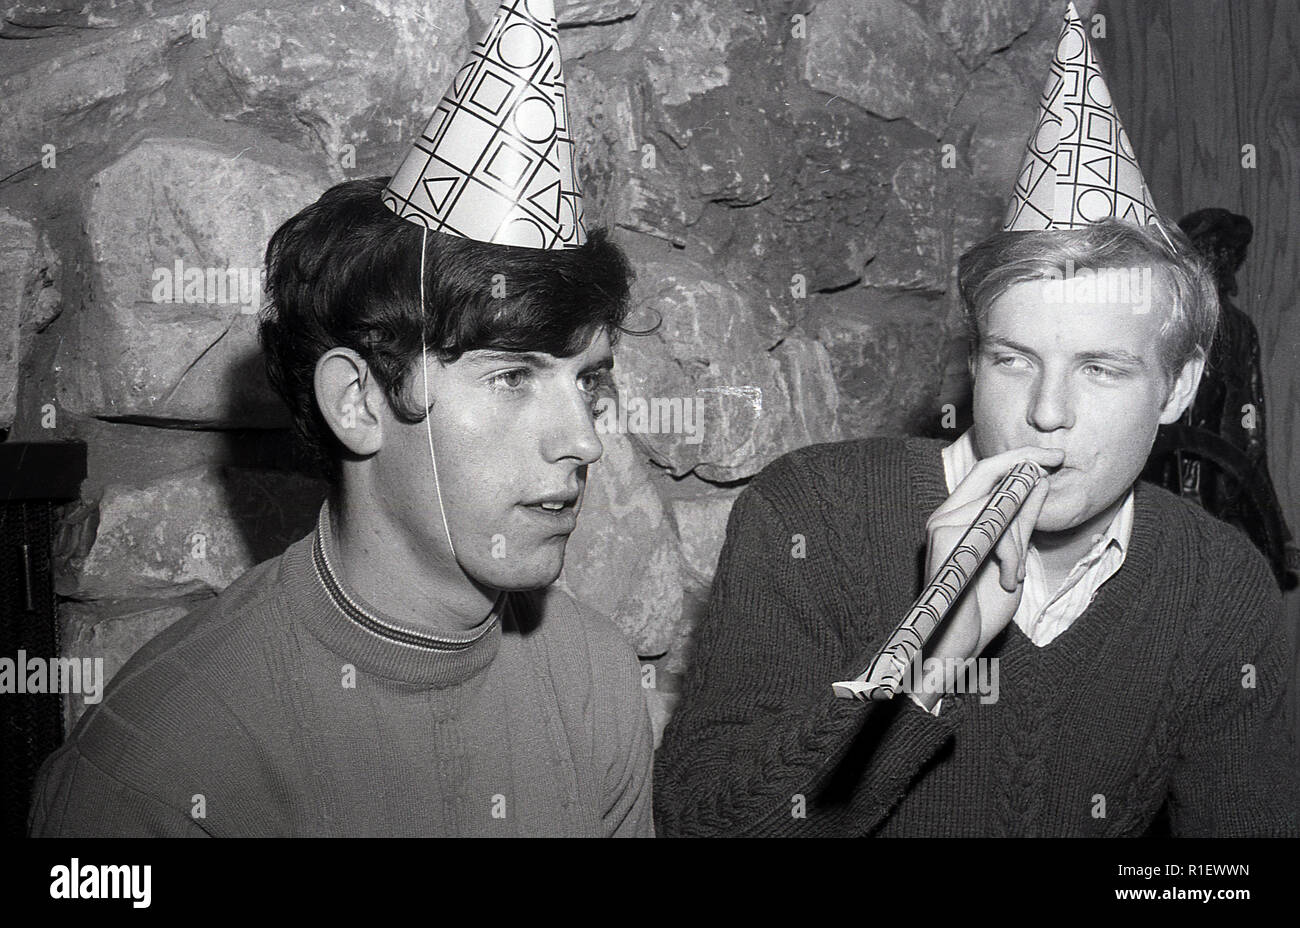 1970s, historical, a party, LA, two young men wearing party hats or cones on their heads, one blowing a paper streamer, Los Angles, USA. Stock Photo